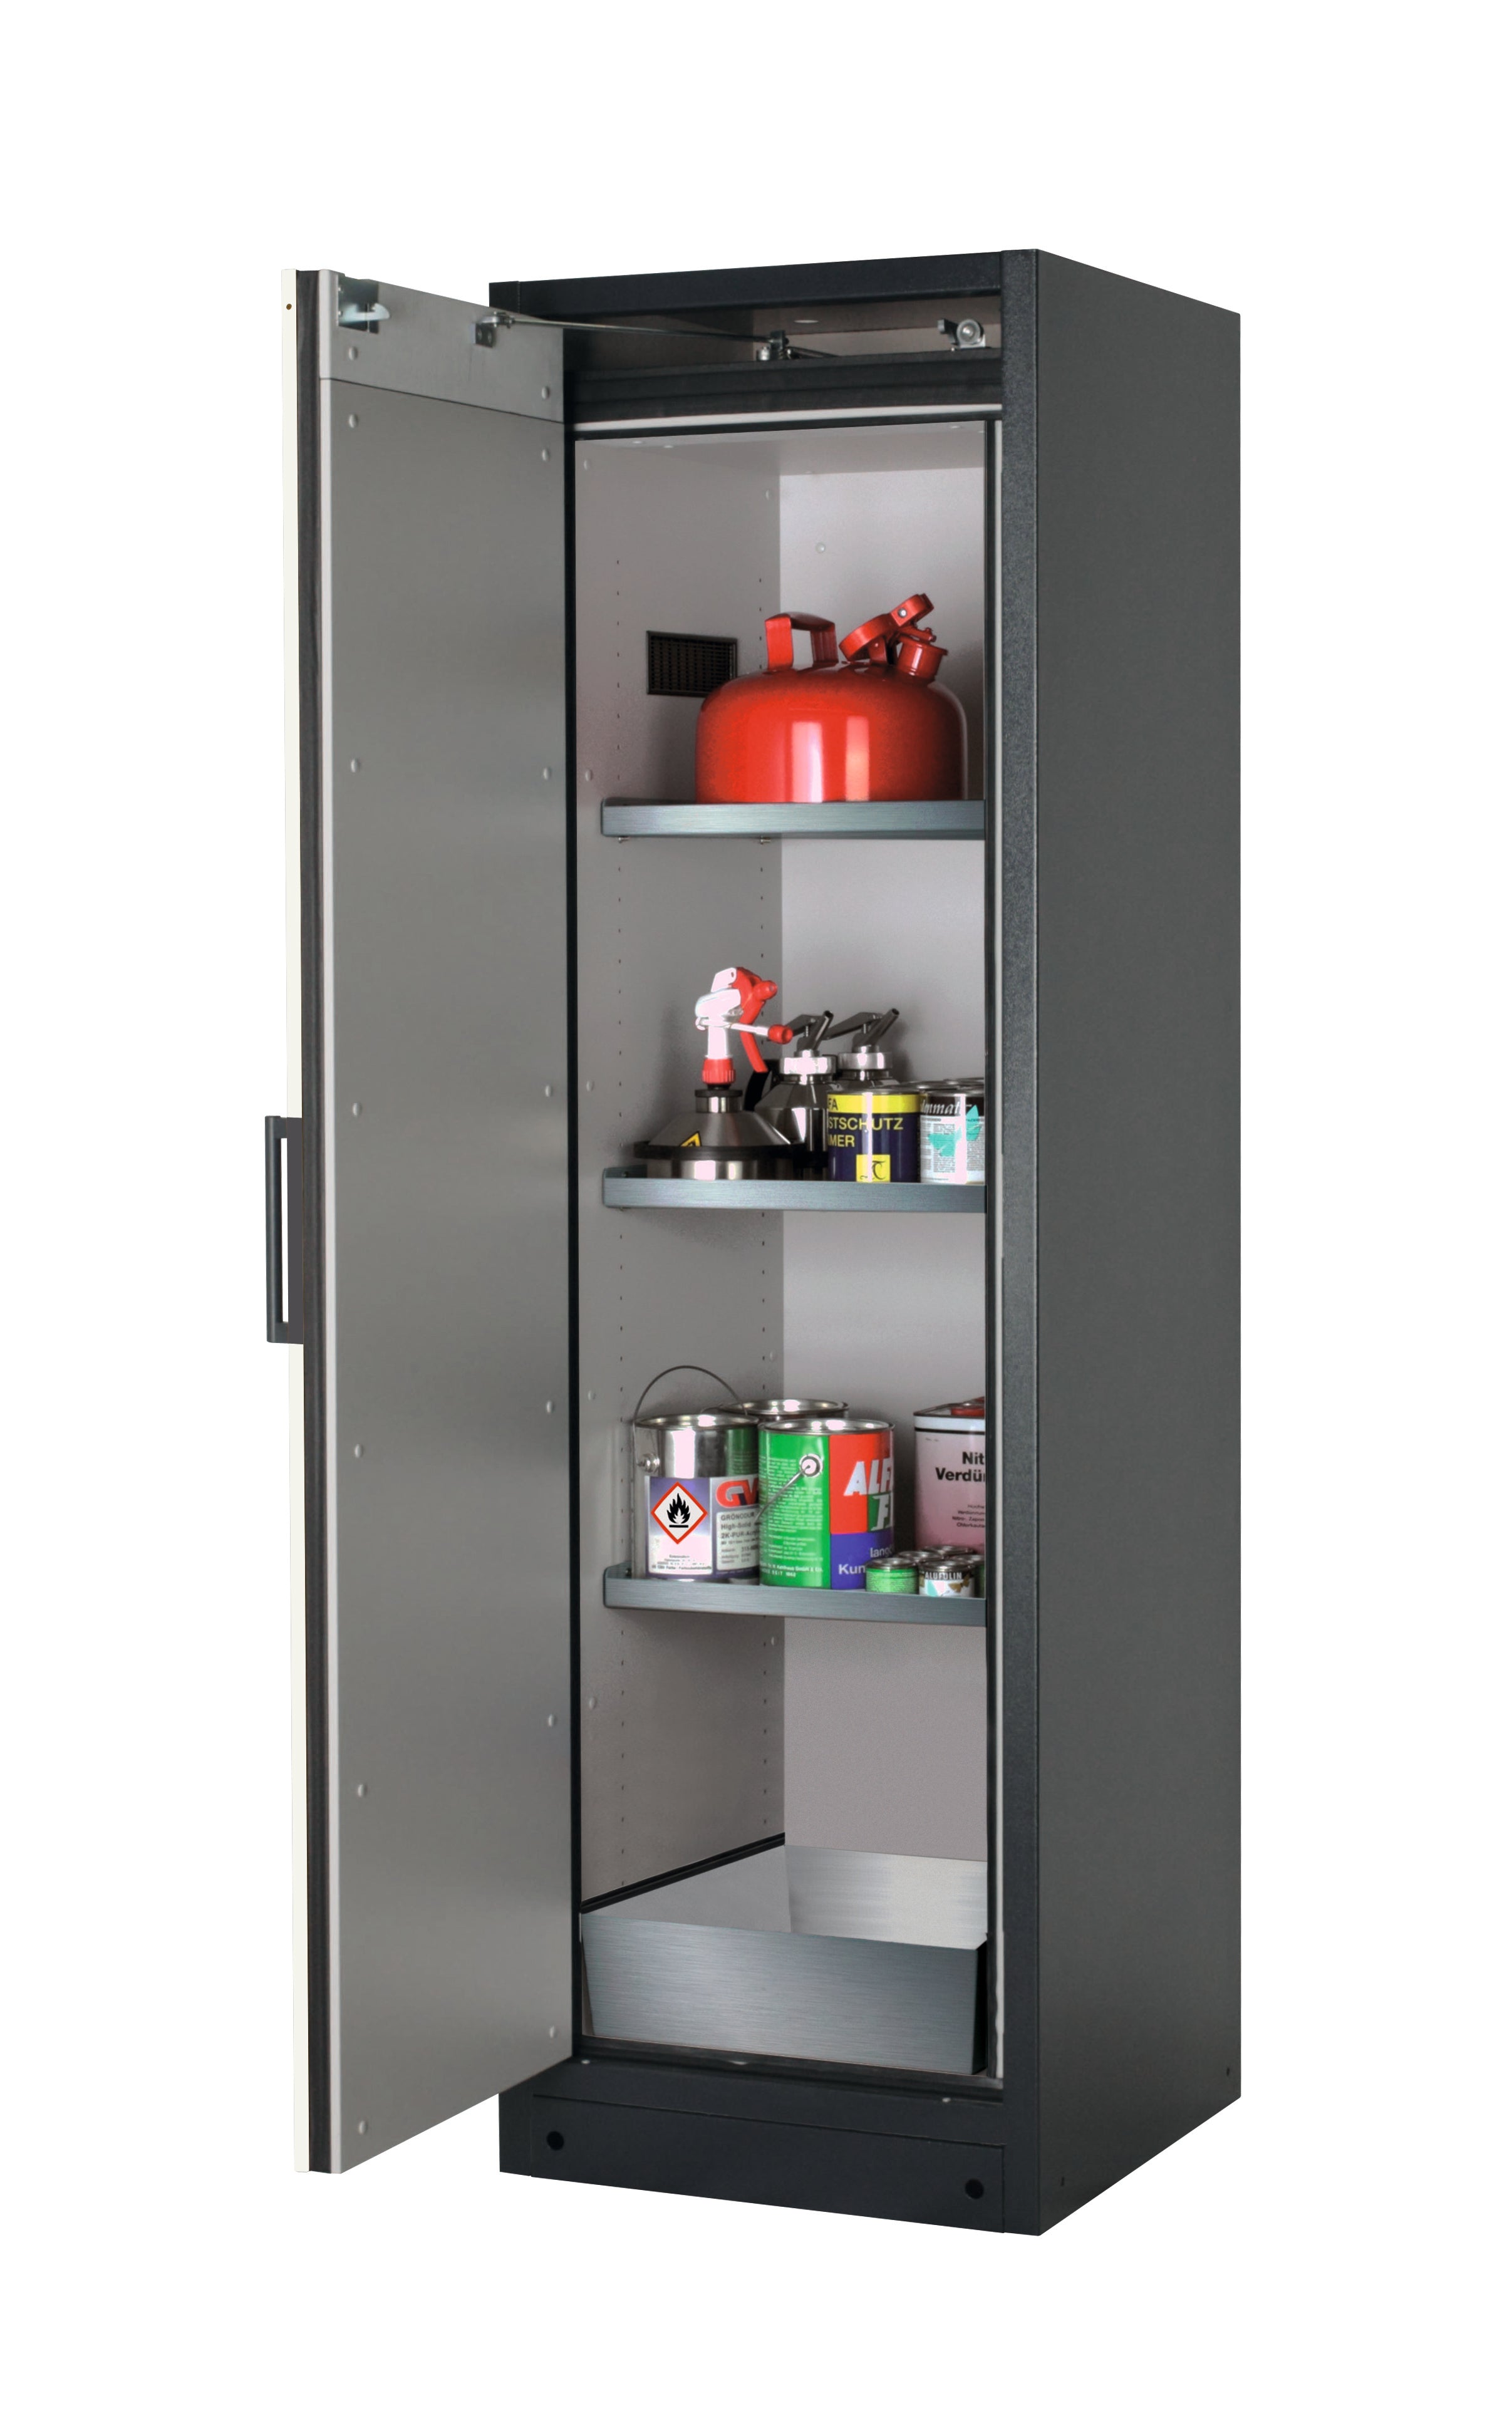 Type 90 safety storage cabinet Q-PEGASUS-90 model Q90.195.060.WDAC in asecos silver with 3x shelf standard (stainless steel 1.4301),